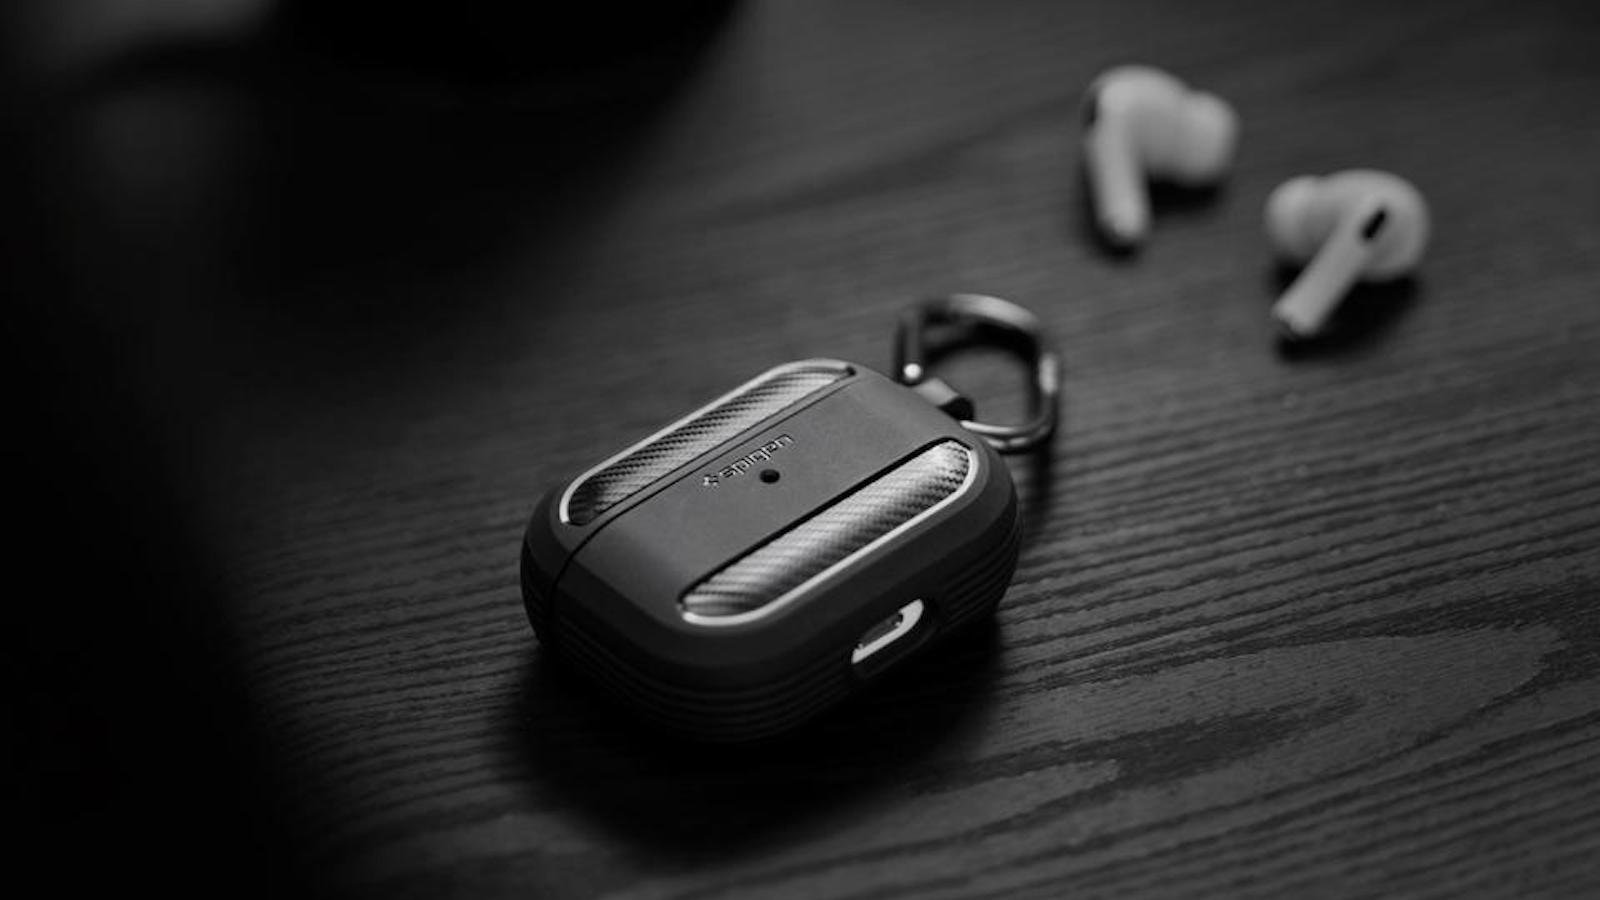 Spigen AirPods Pro Rugged Armor Earbud Storage Case offers everyday coverage